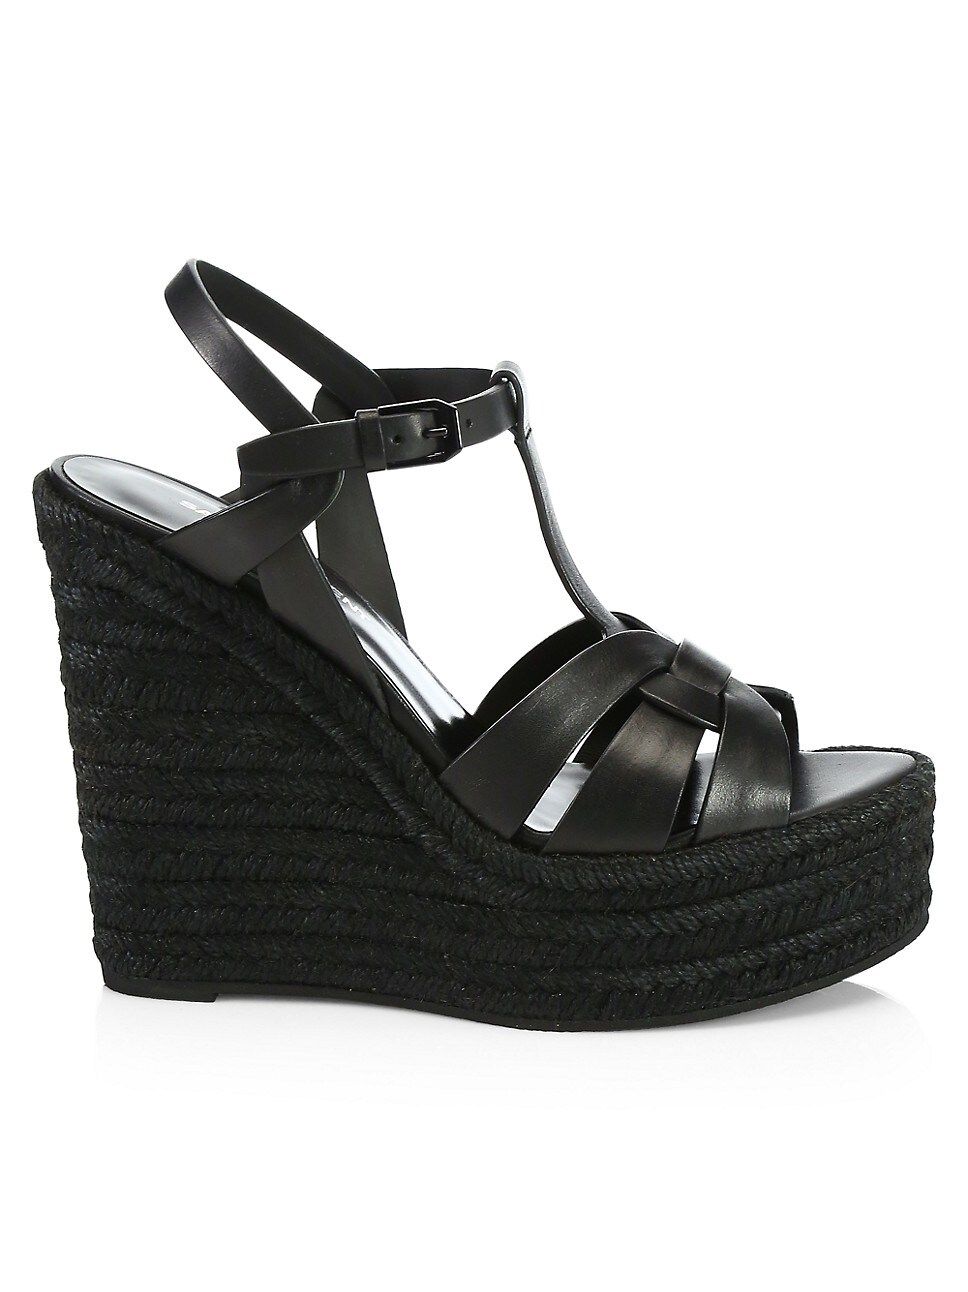 Tribute Leather Espadrille Wedge Sandals | Saks Fifth Avenue